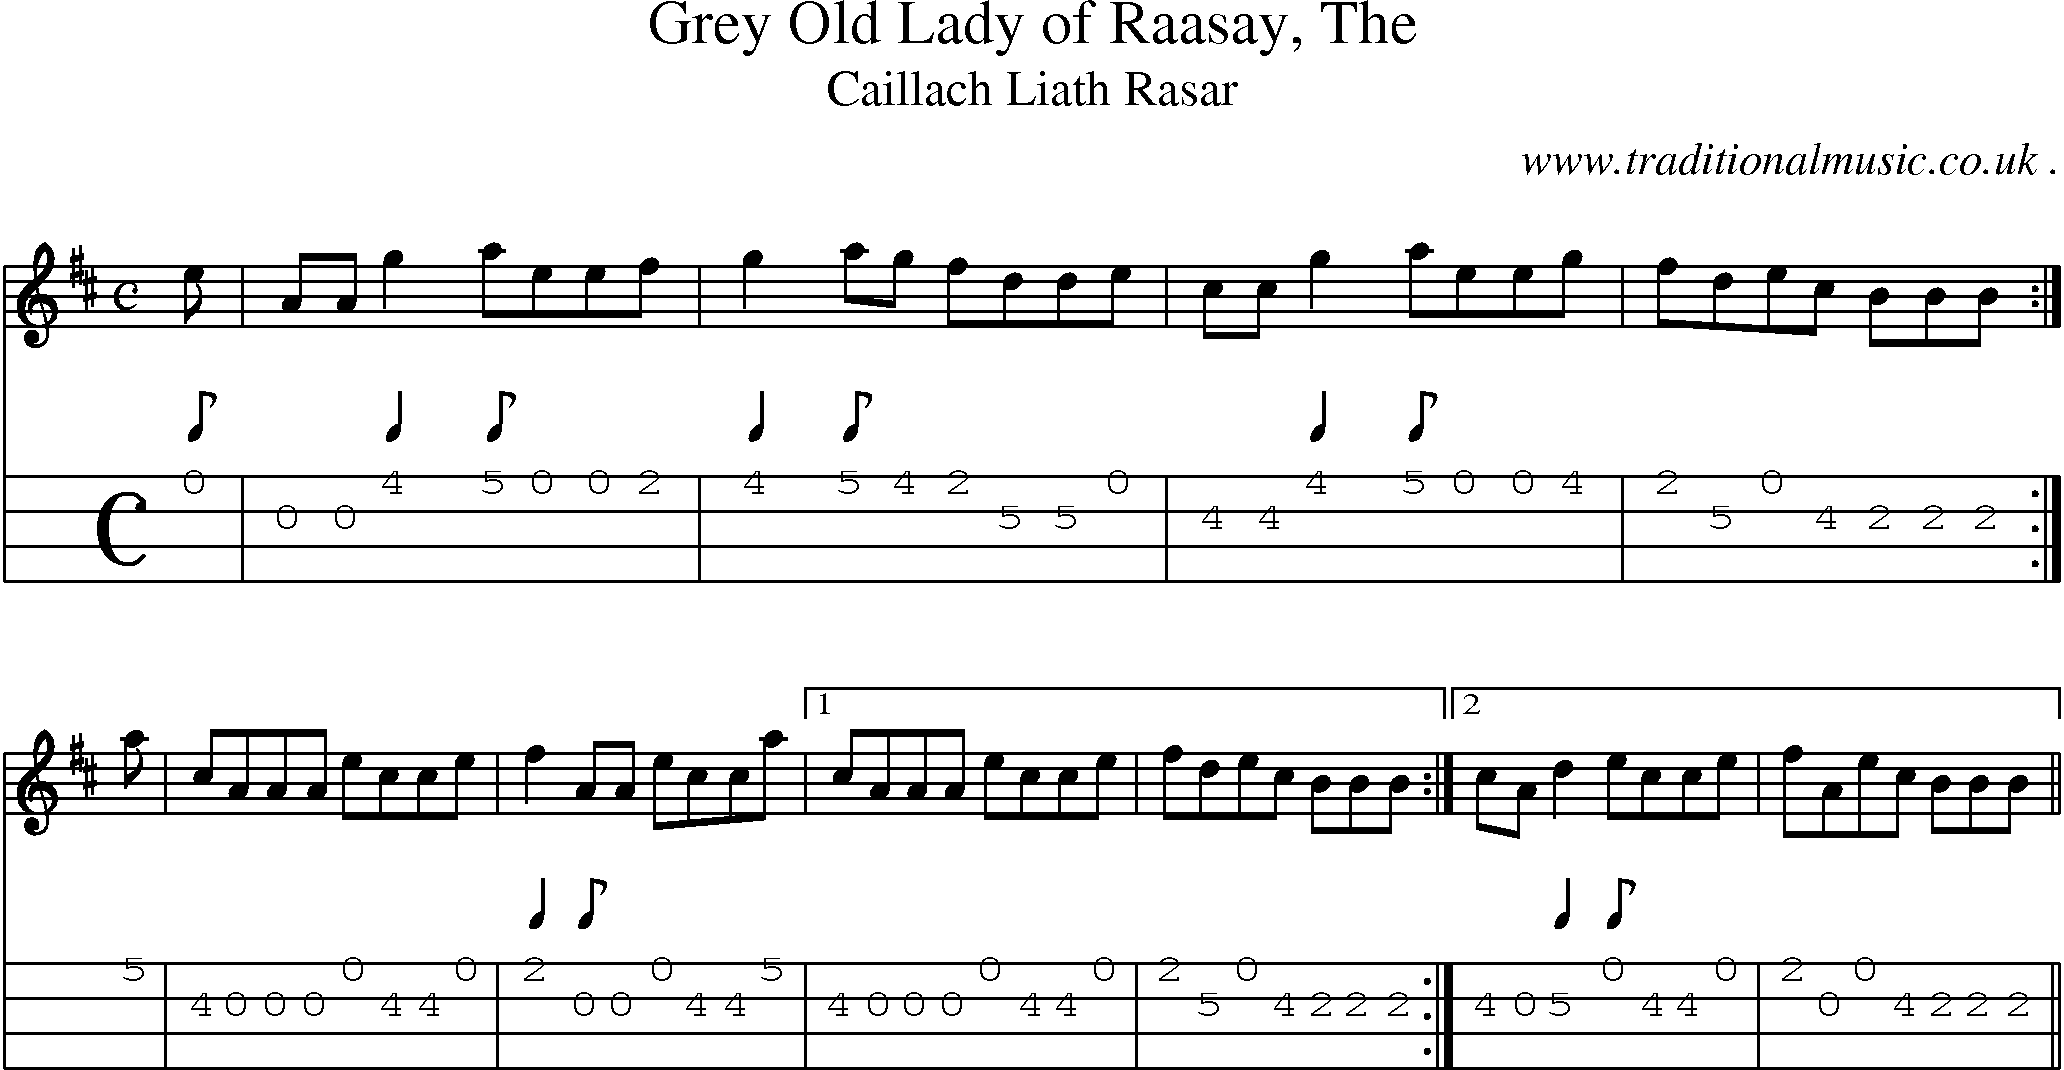 Sheet-music  score, Chords and Mandolin Tabs for Grey Old Lady Of Raasay The